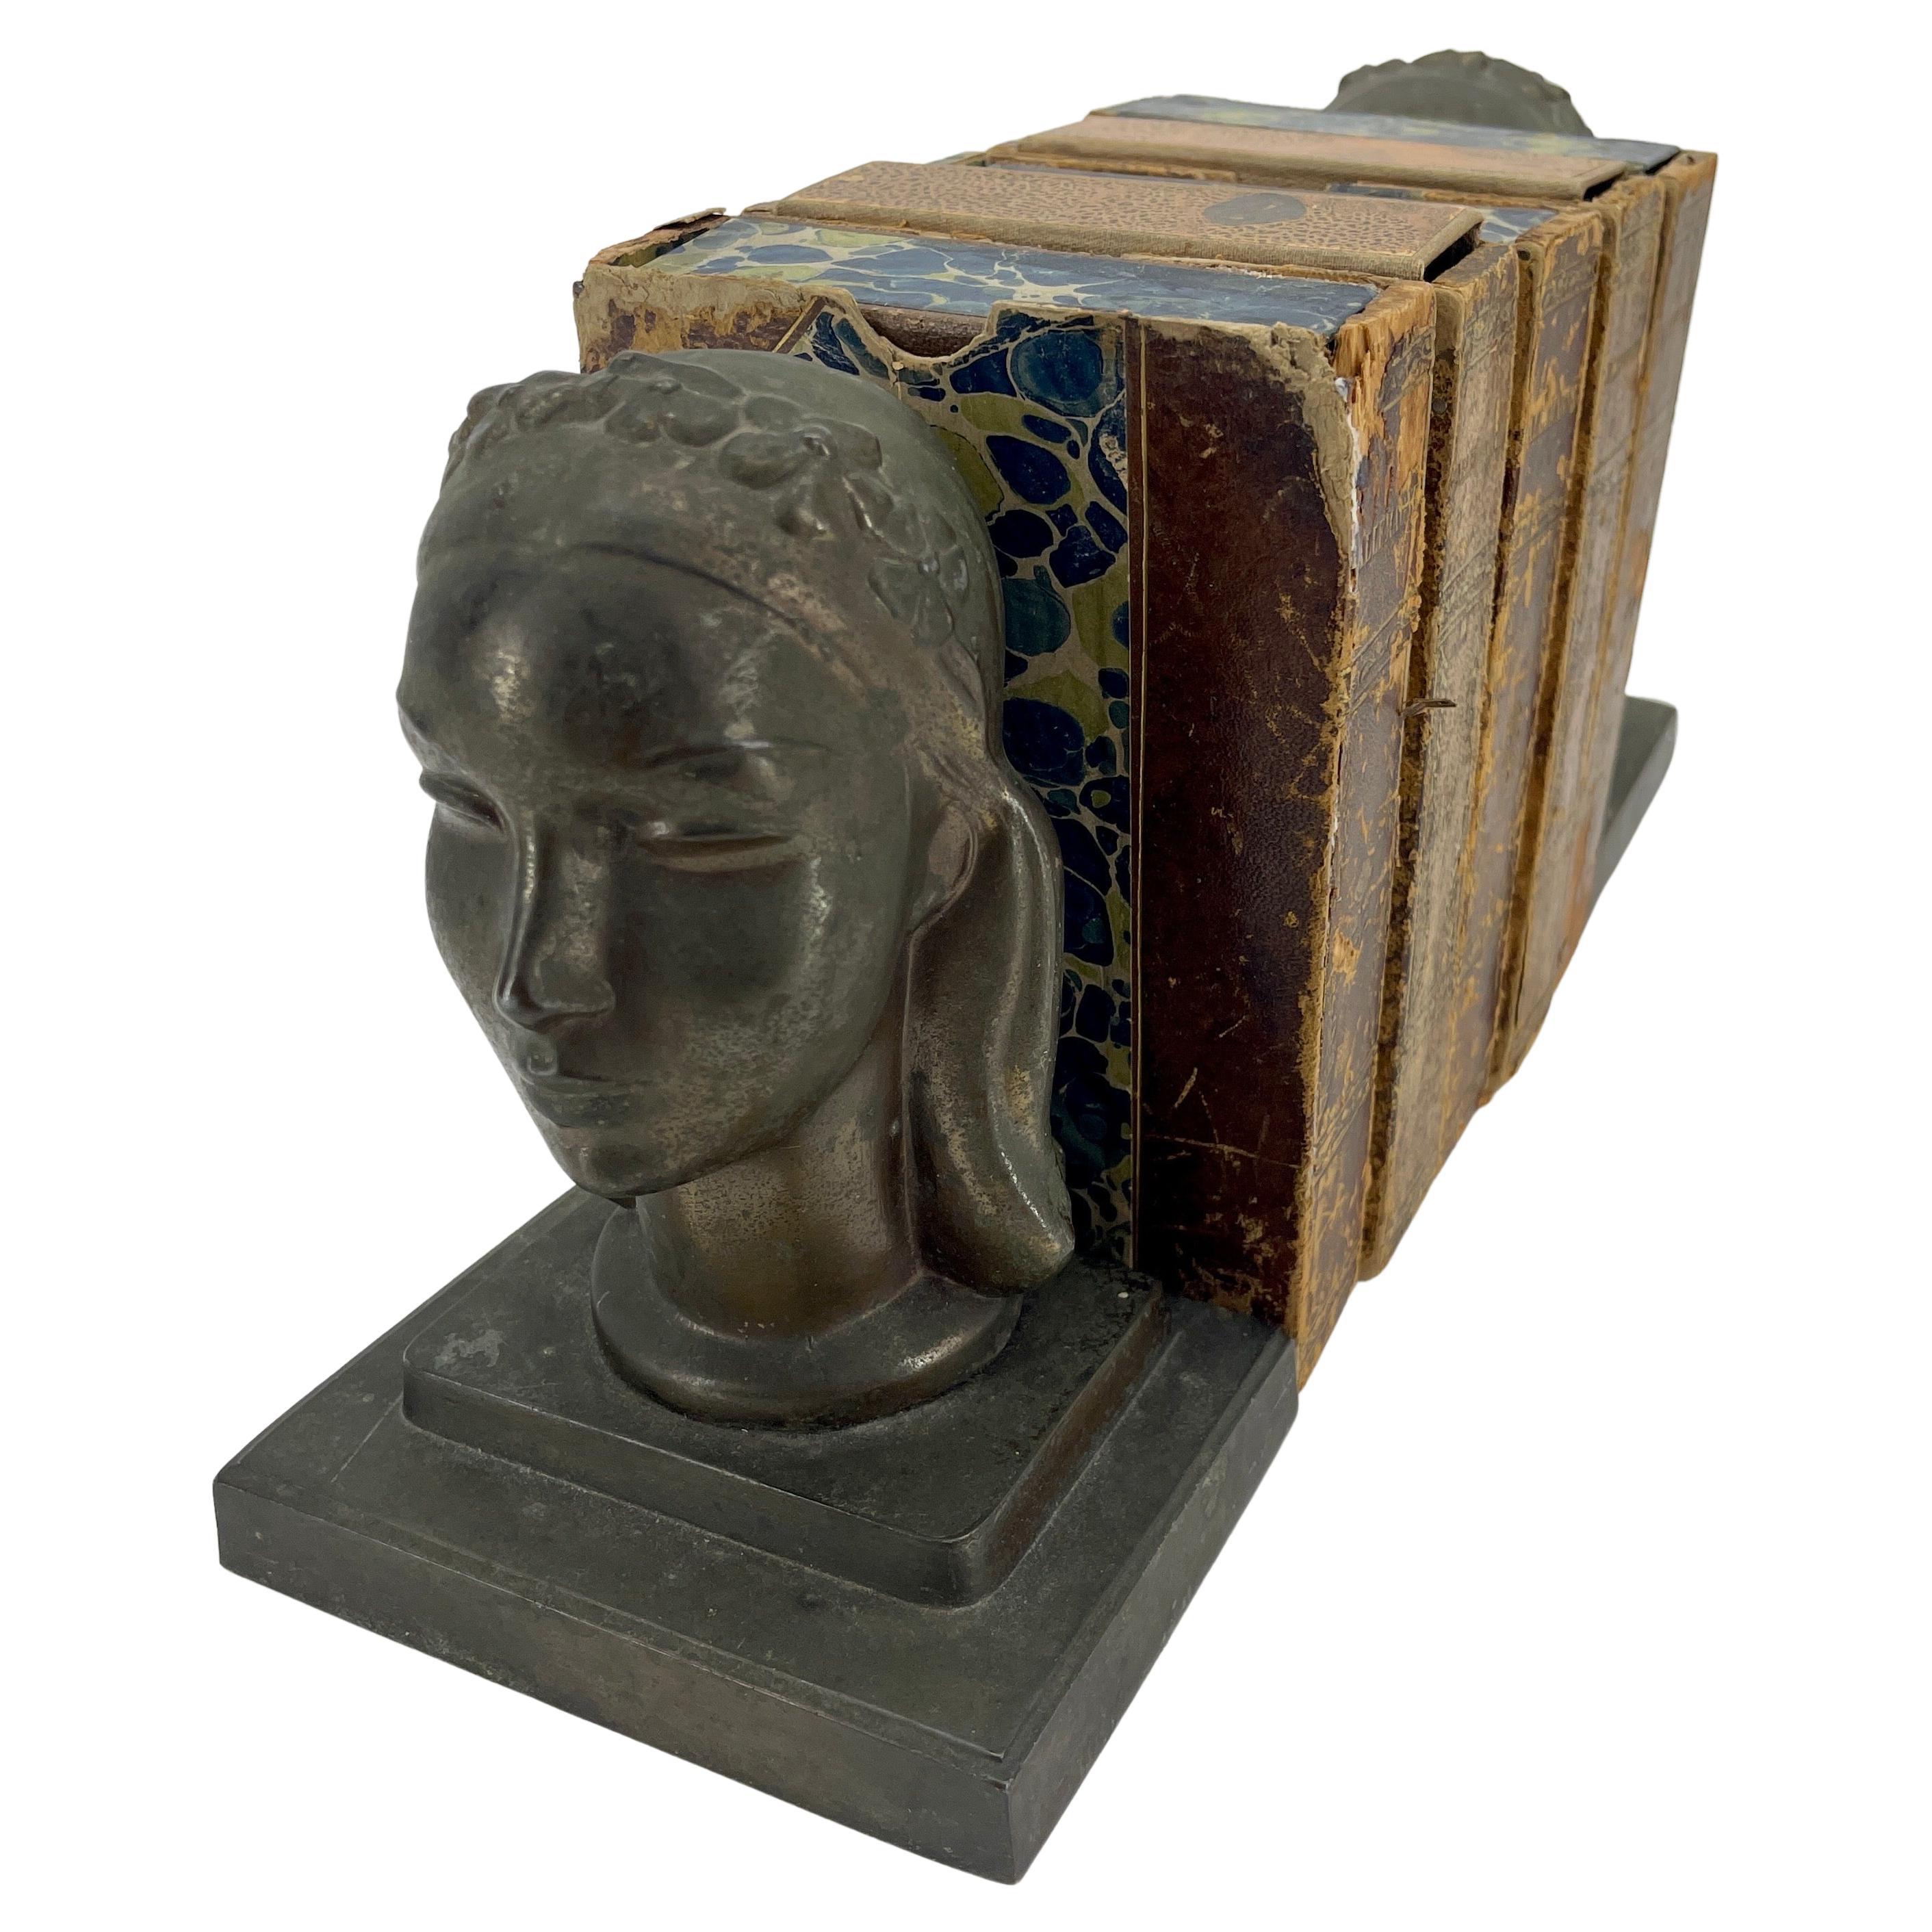 American Pair Art Deco Female Bust Bookends Sculptures by Frankart, circa 1930s